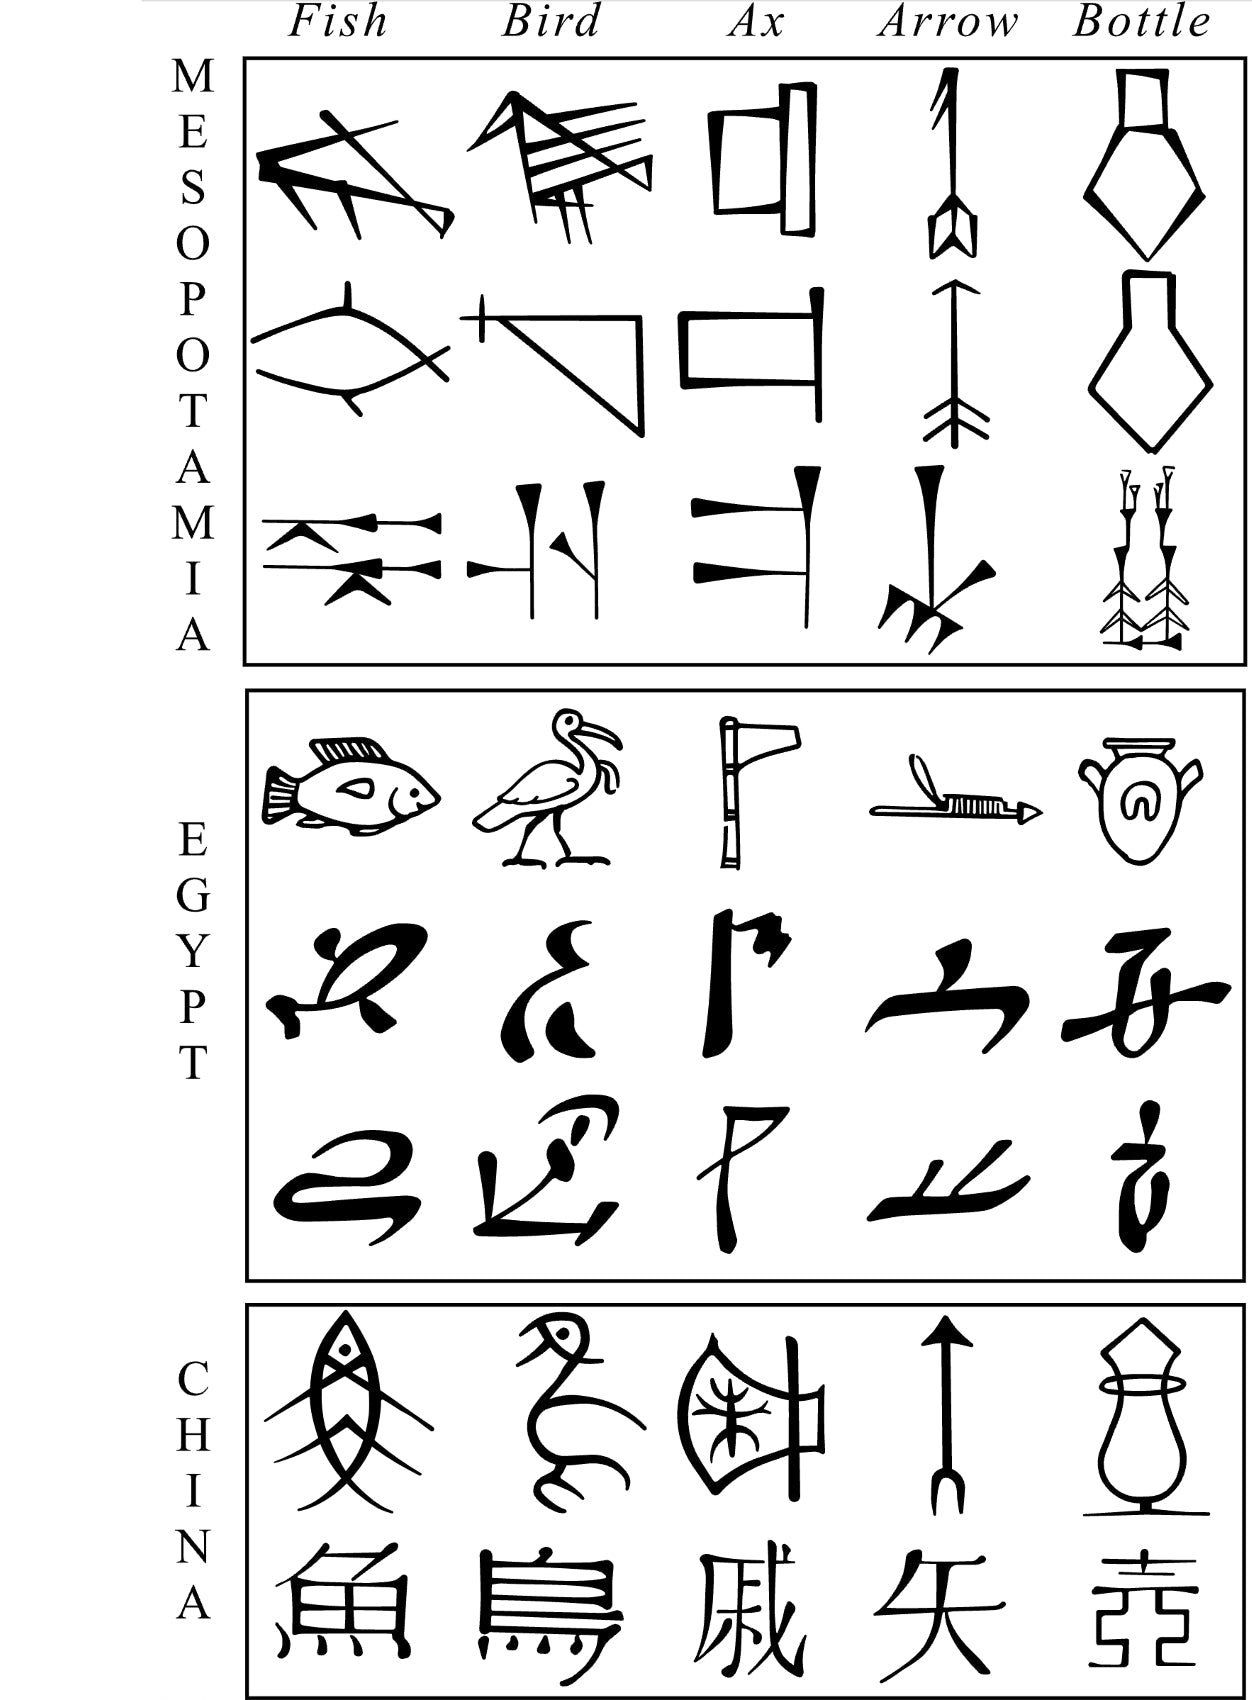 Early writing systems. Comparative evolution of Cuneiform, Egyptian and Chinese characters.